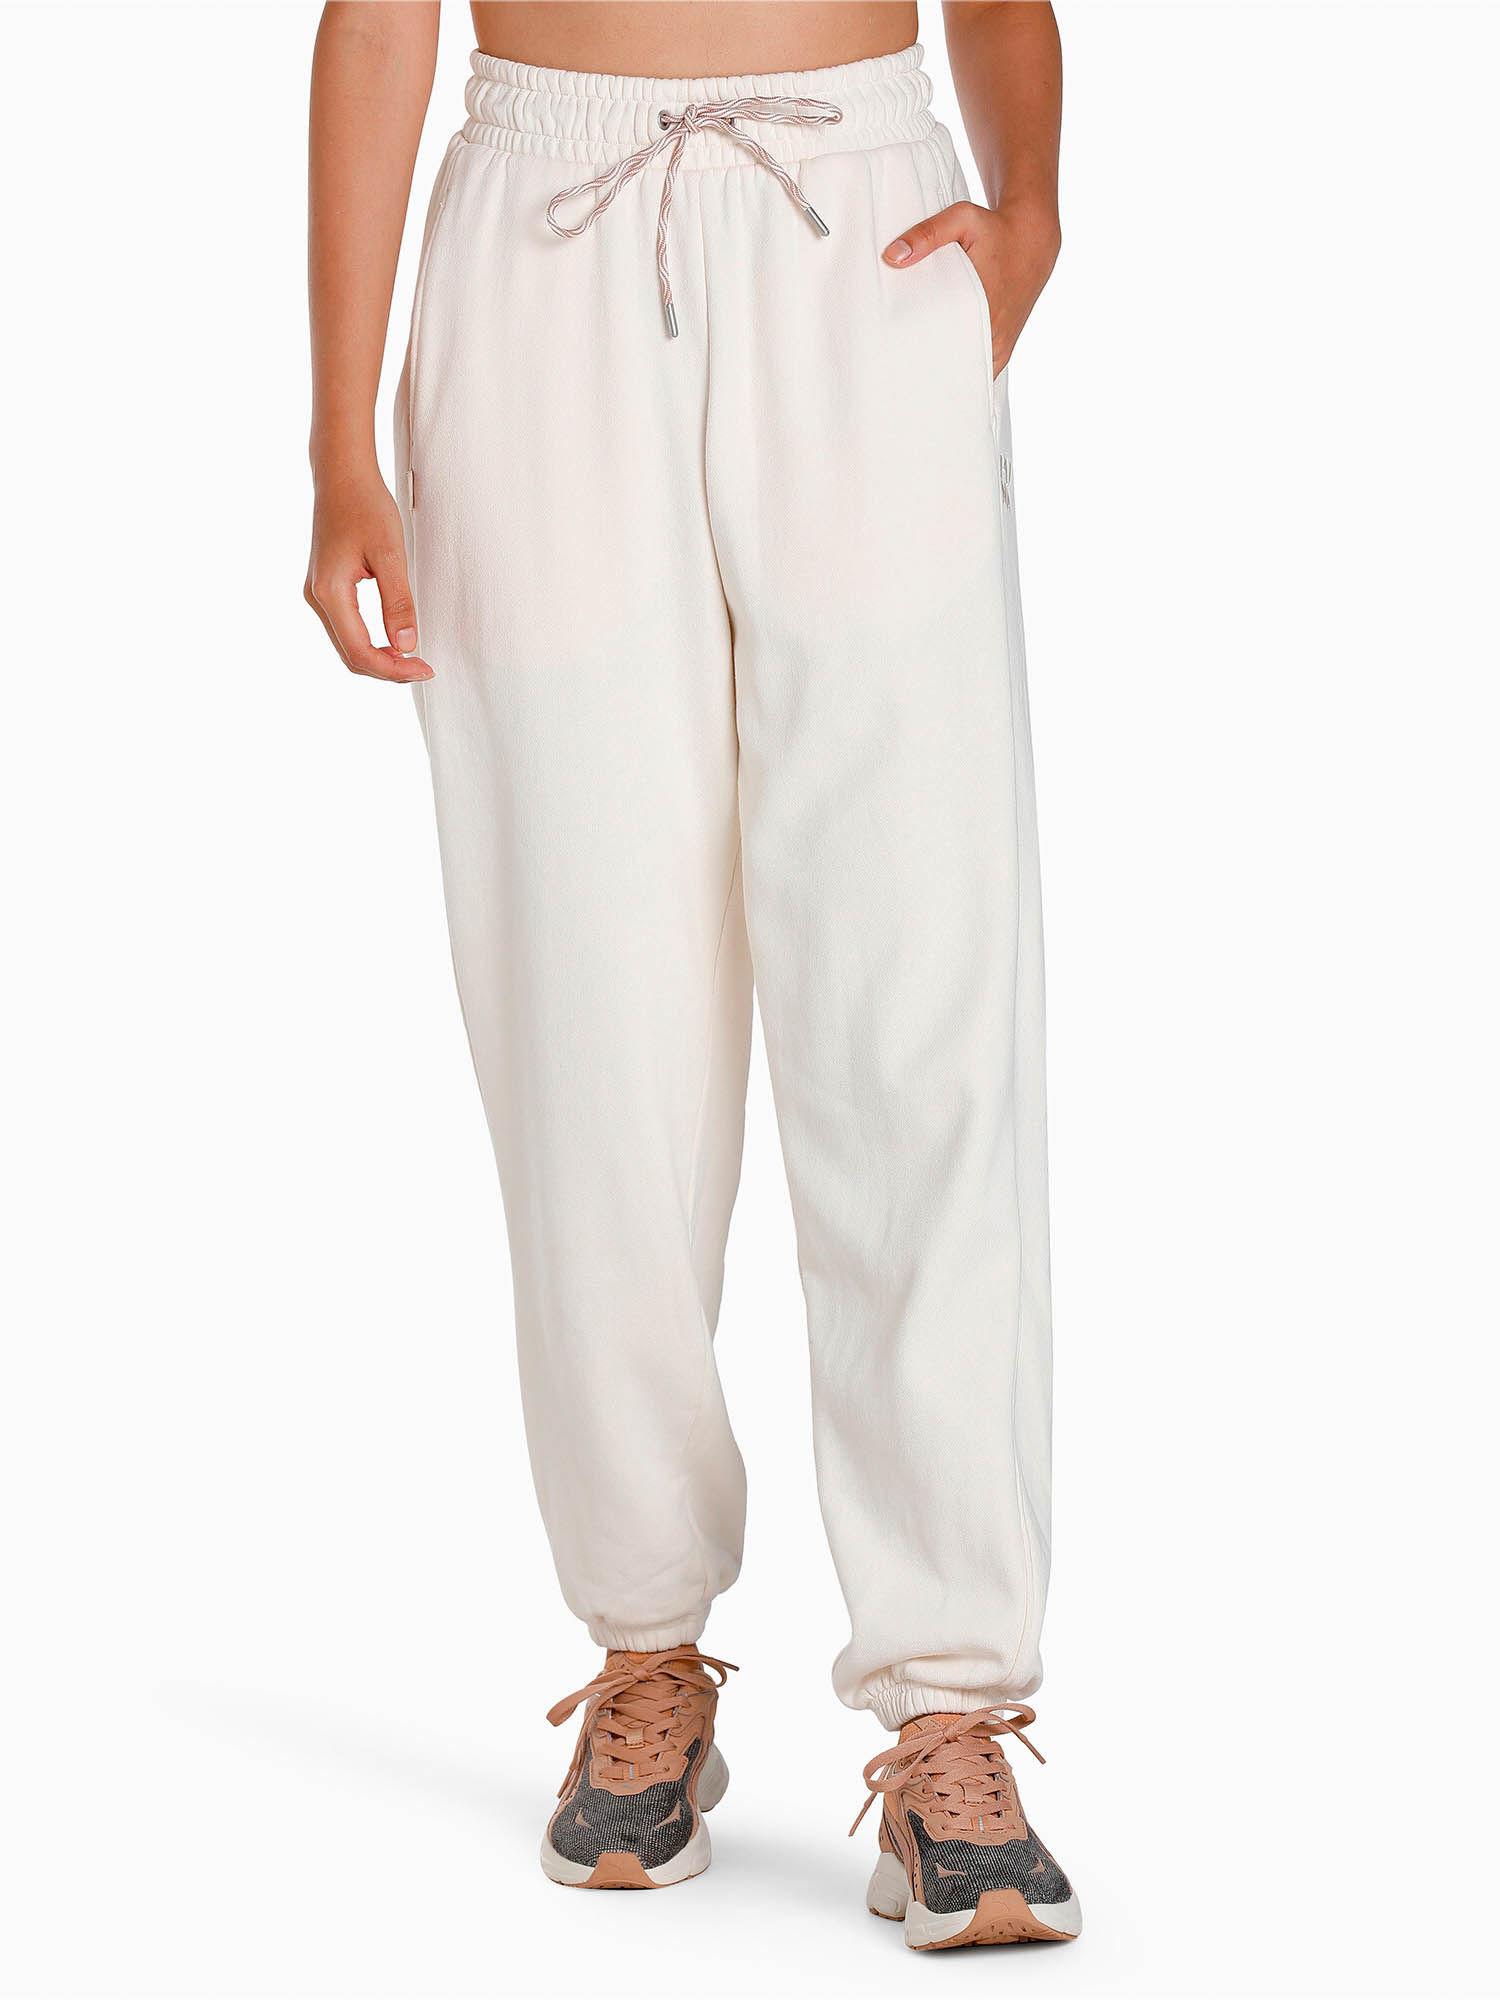 infuse tr women white sweatpant